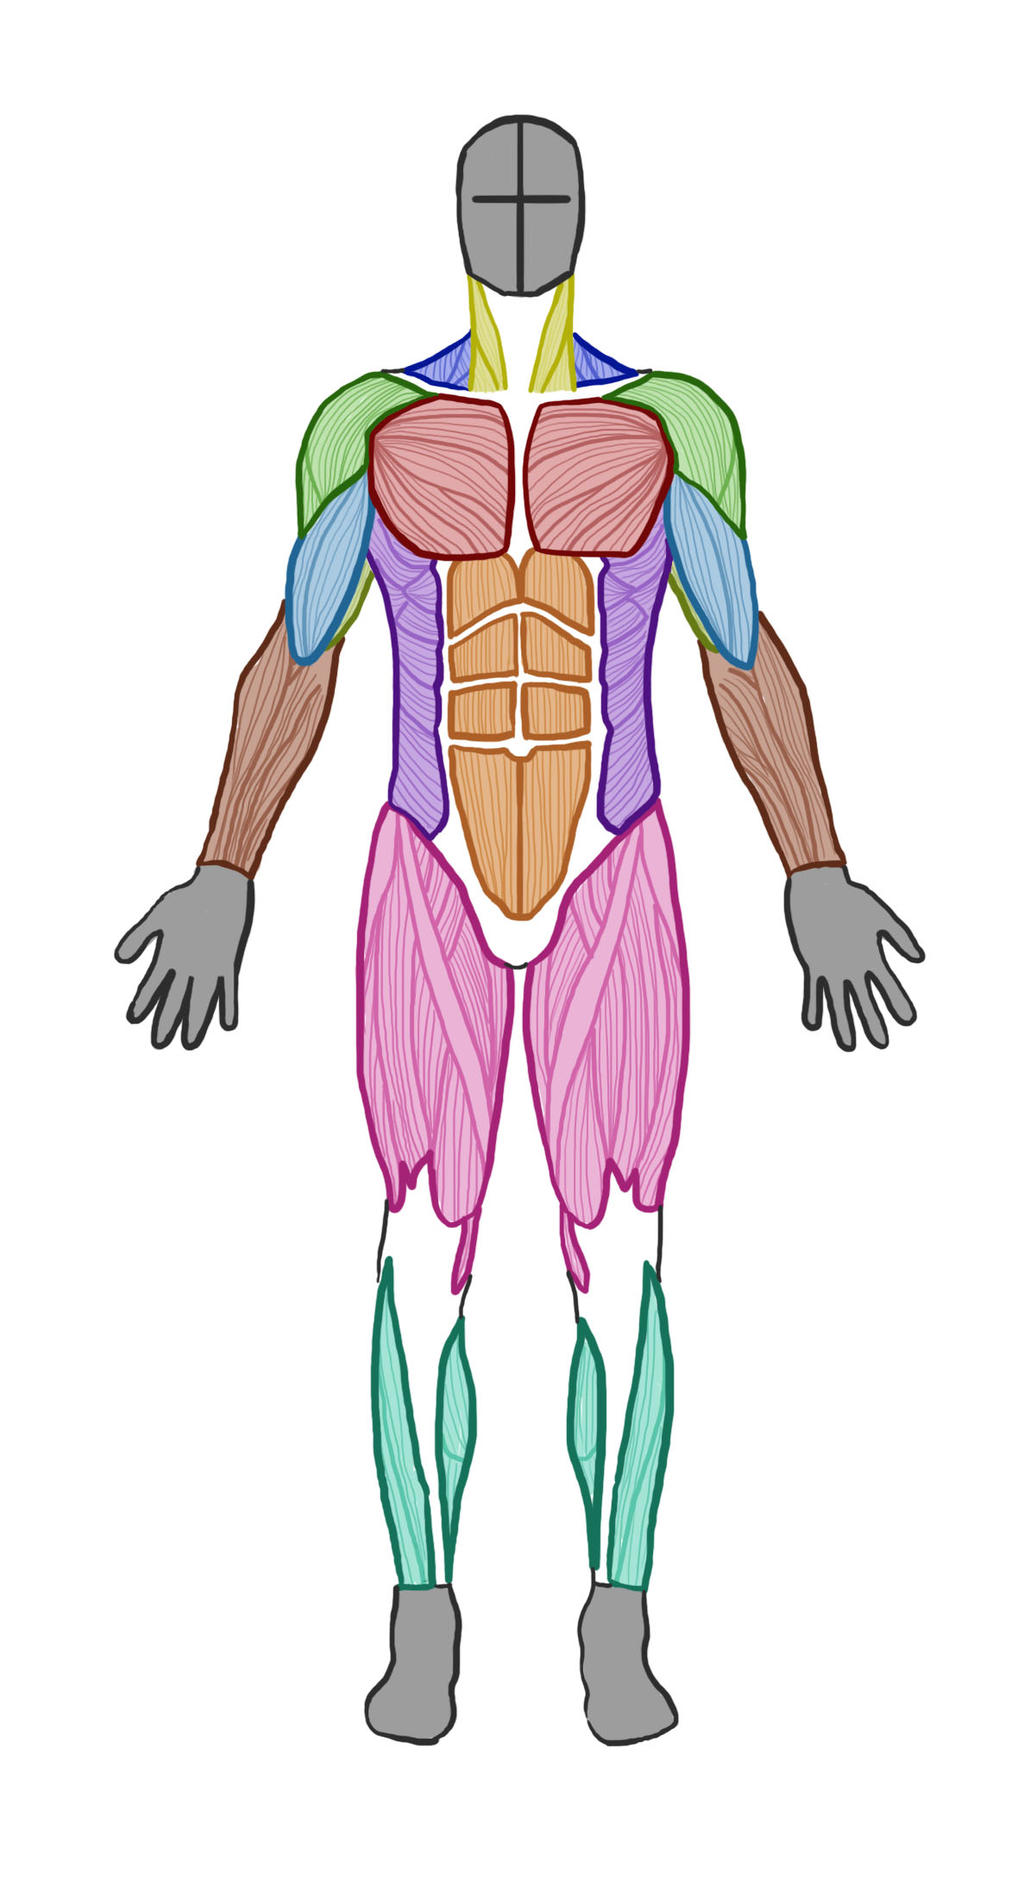 Man Muscle Anatomy (Front) by ArtistSaif on DeviantArt